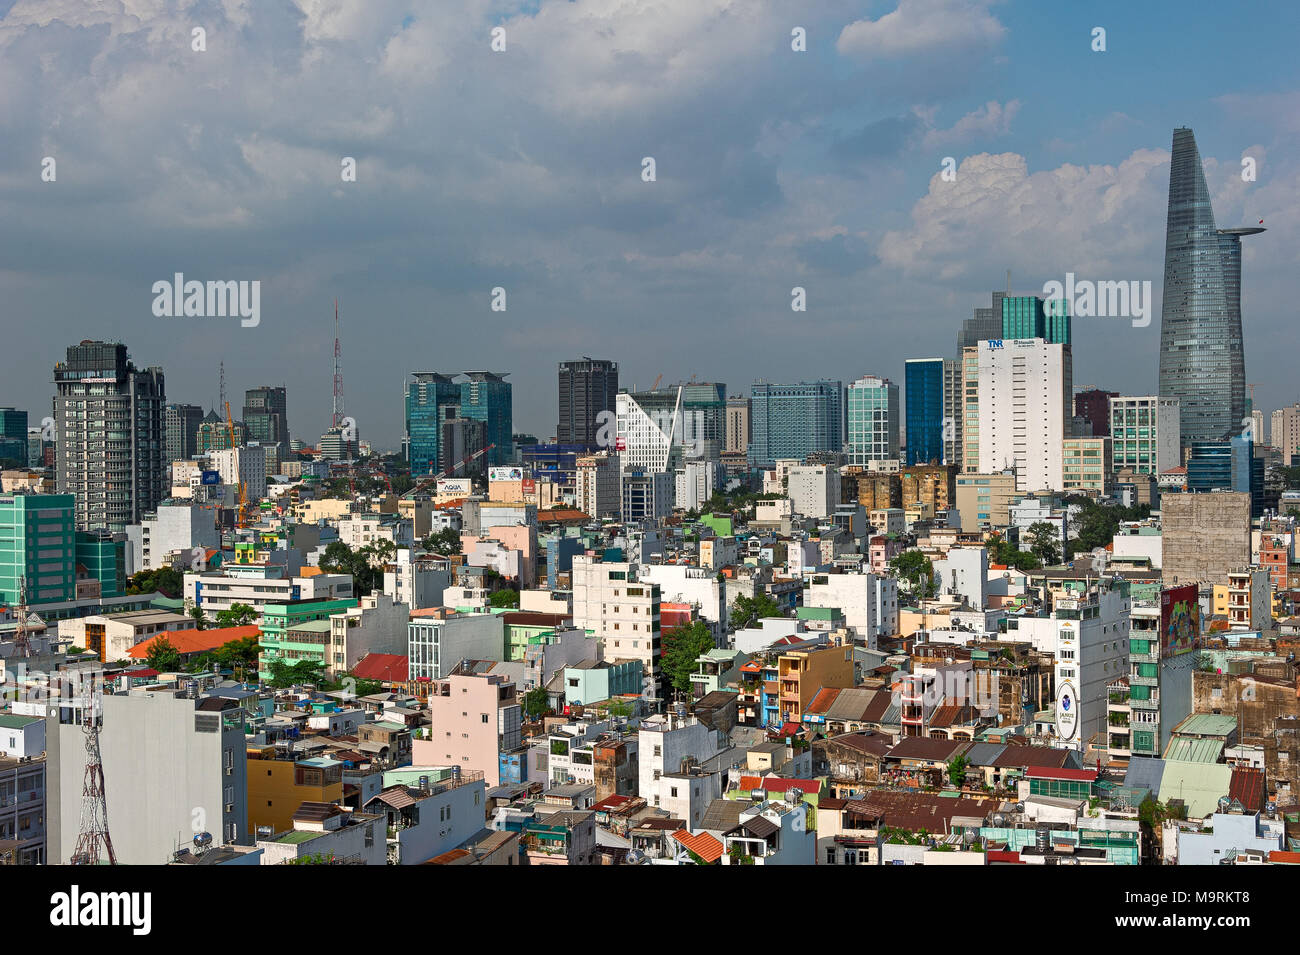 HO CHI MINH CITY, VIETNAM - APRIL 9, 2017: The sun sets over the Ho Chi Minh City skyline that mix the colonial and business district in Vietnam large Stock Photo